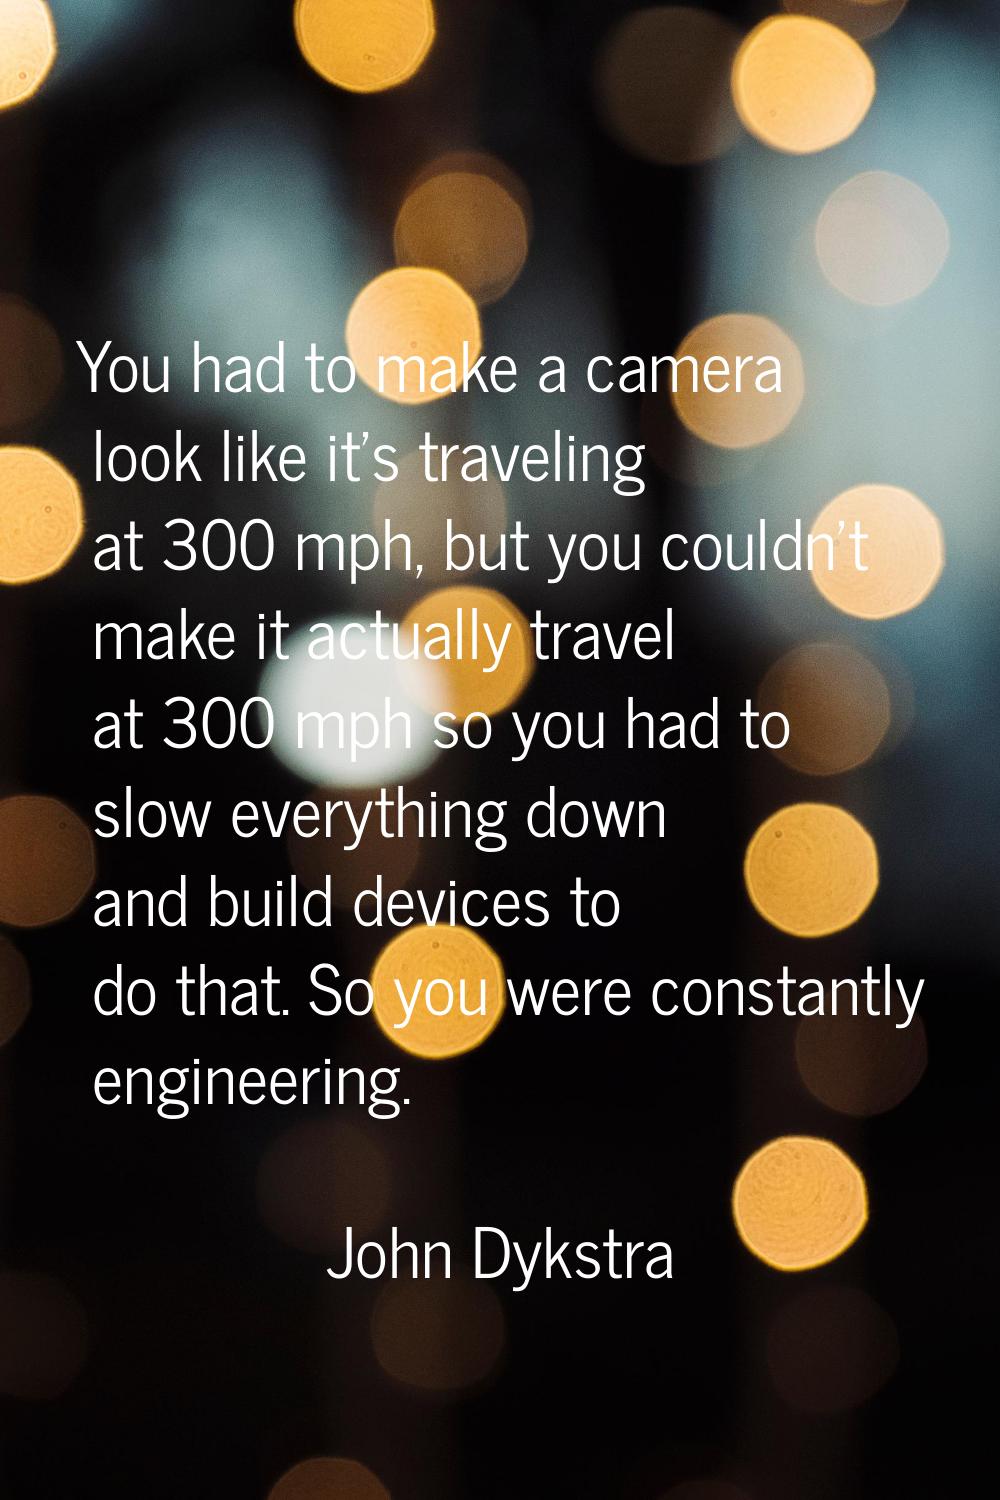 You had to make a camera look like it's traveling at 300 mph, but you couldn't make it actually tra